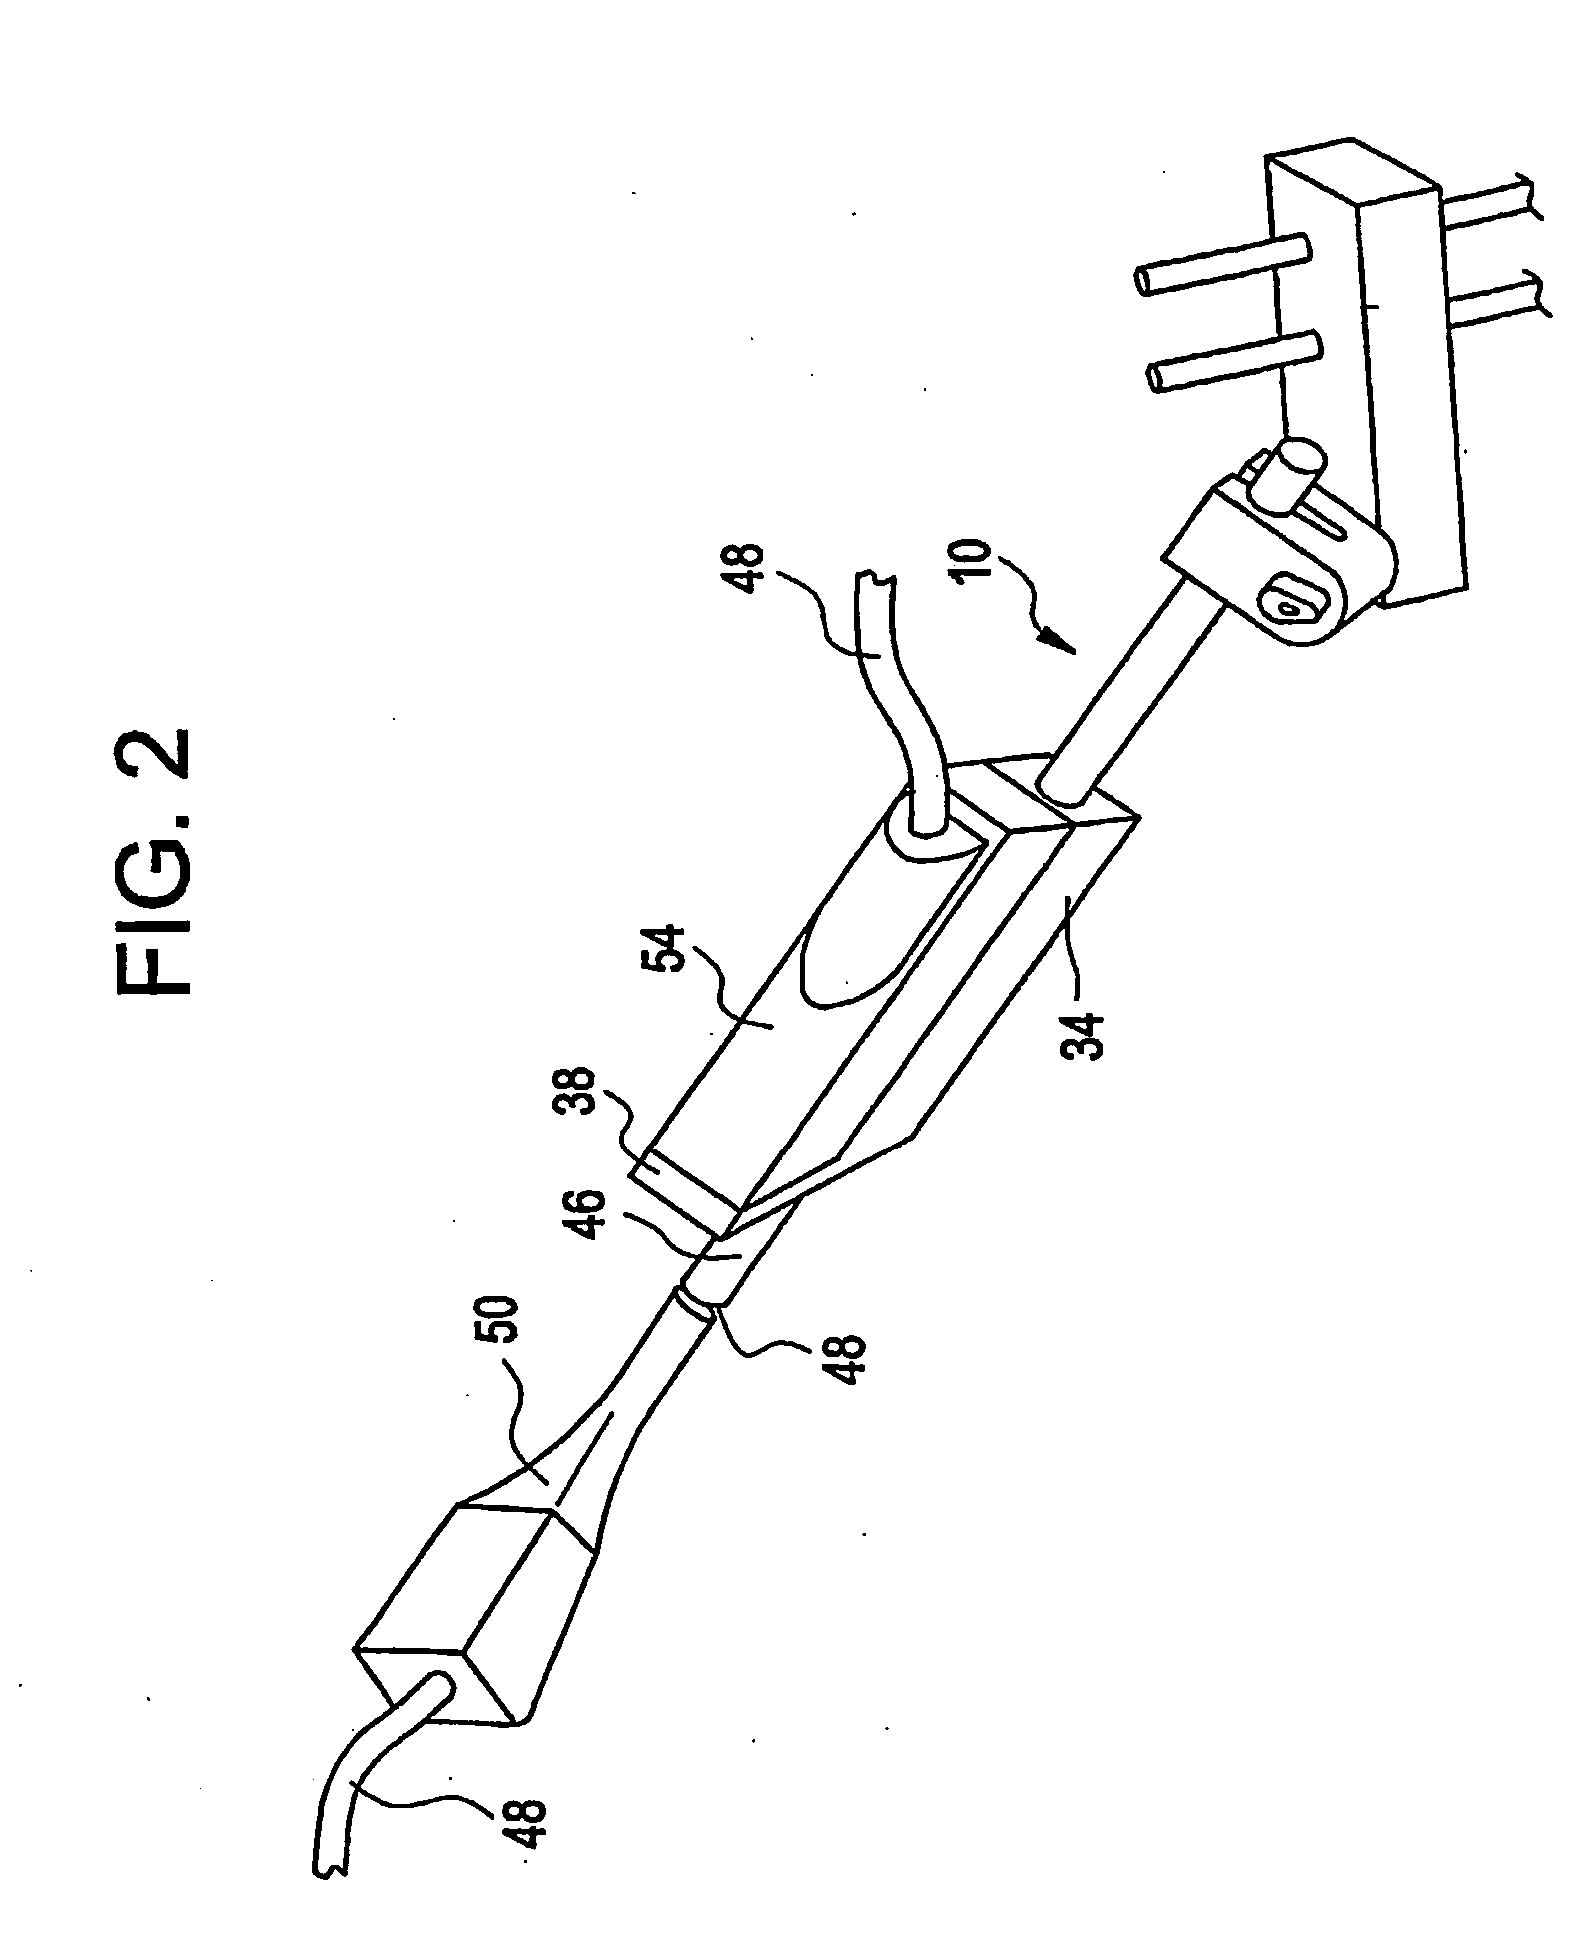 Interchangeable localizing devices for use with tracking systems